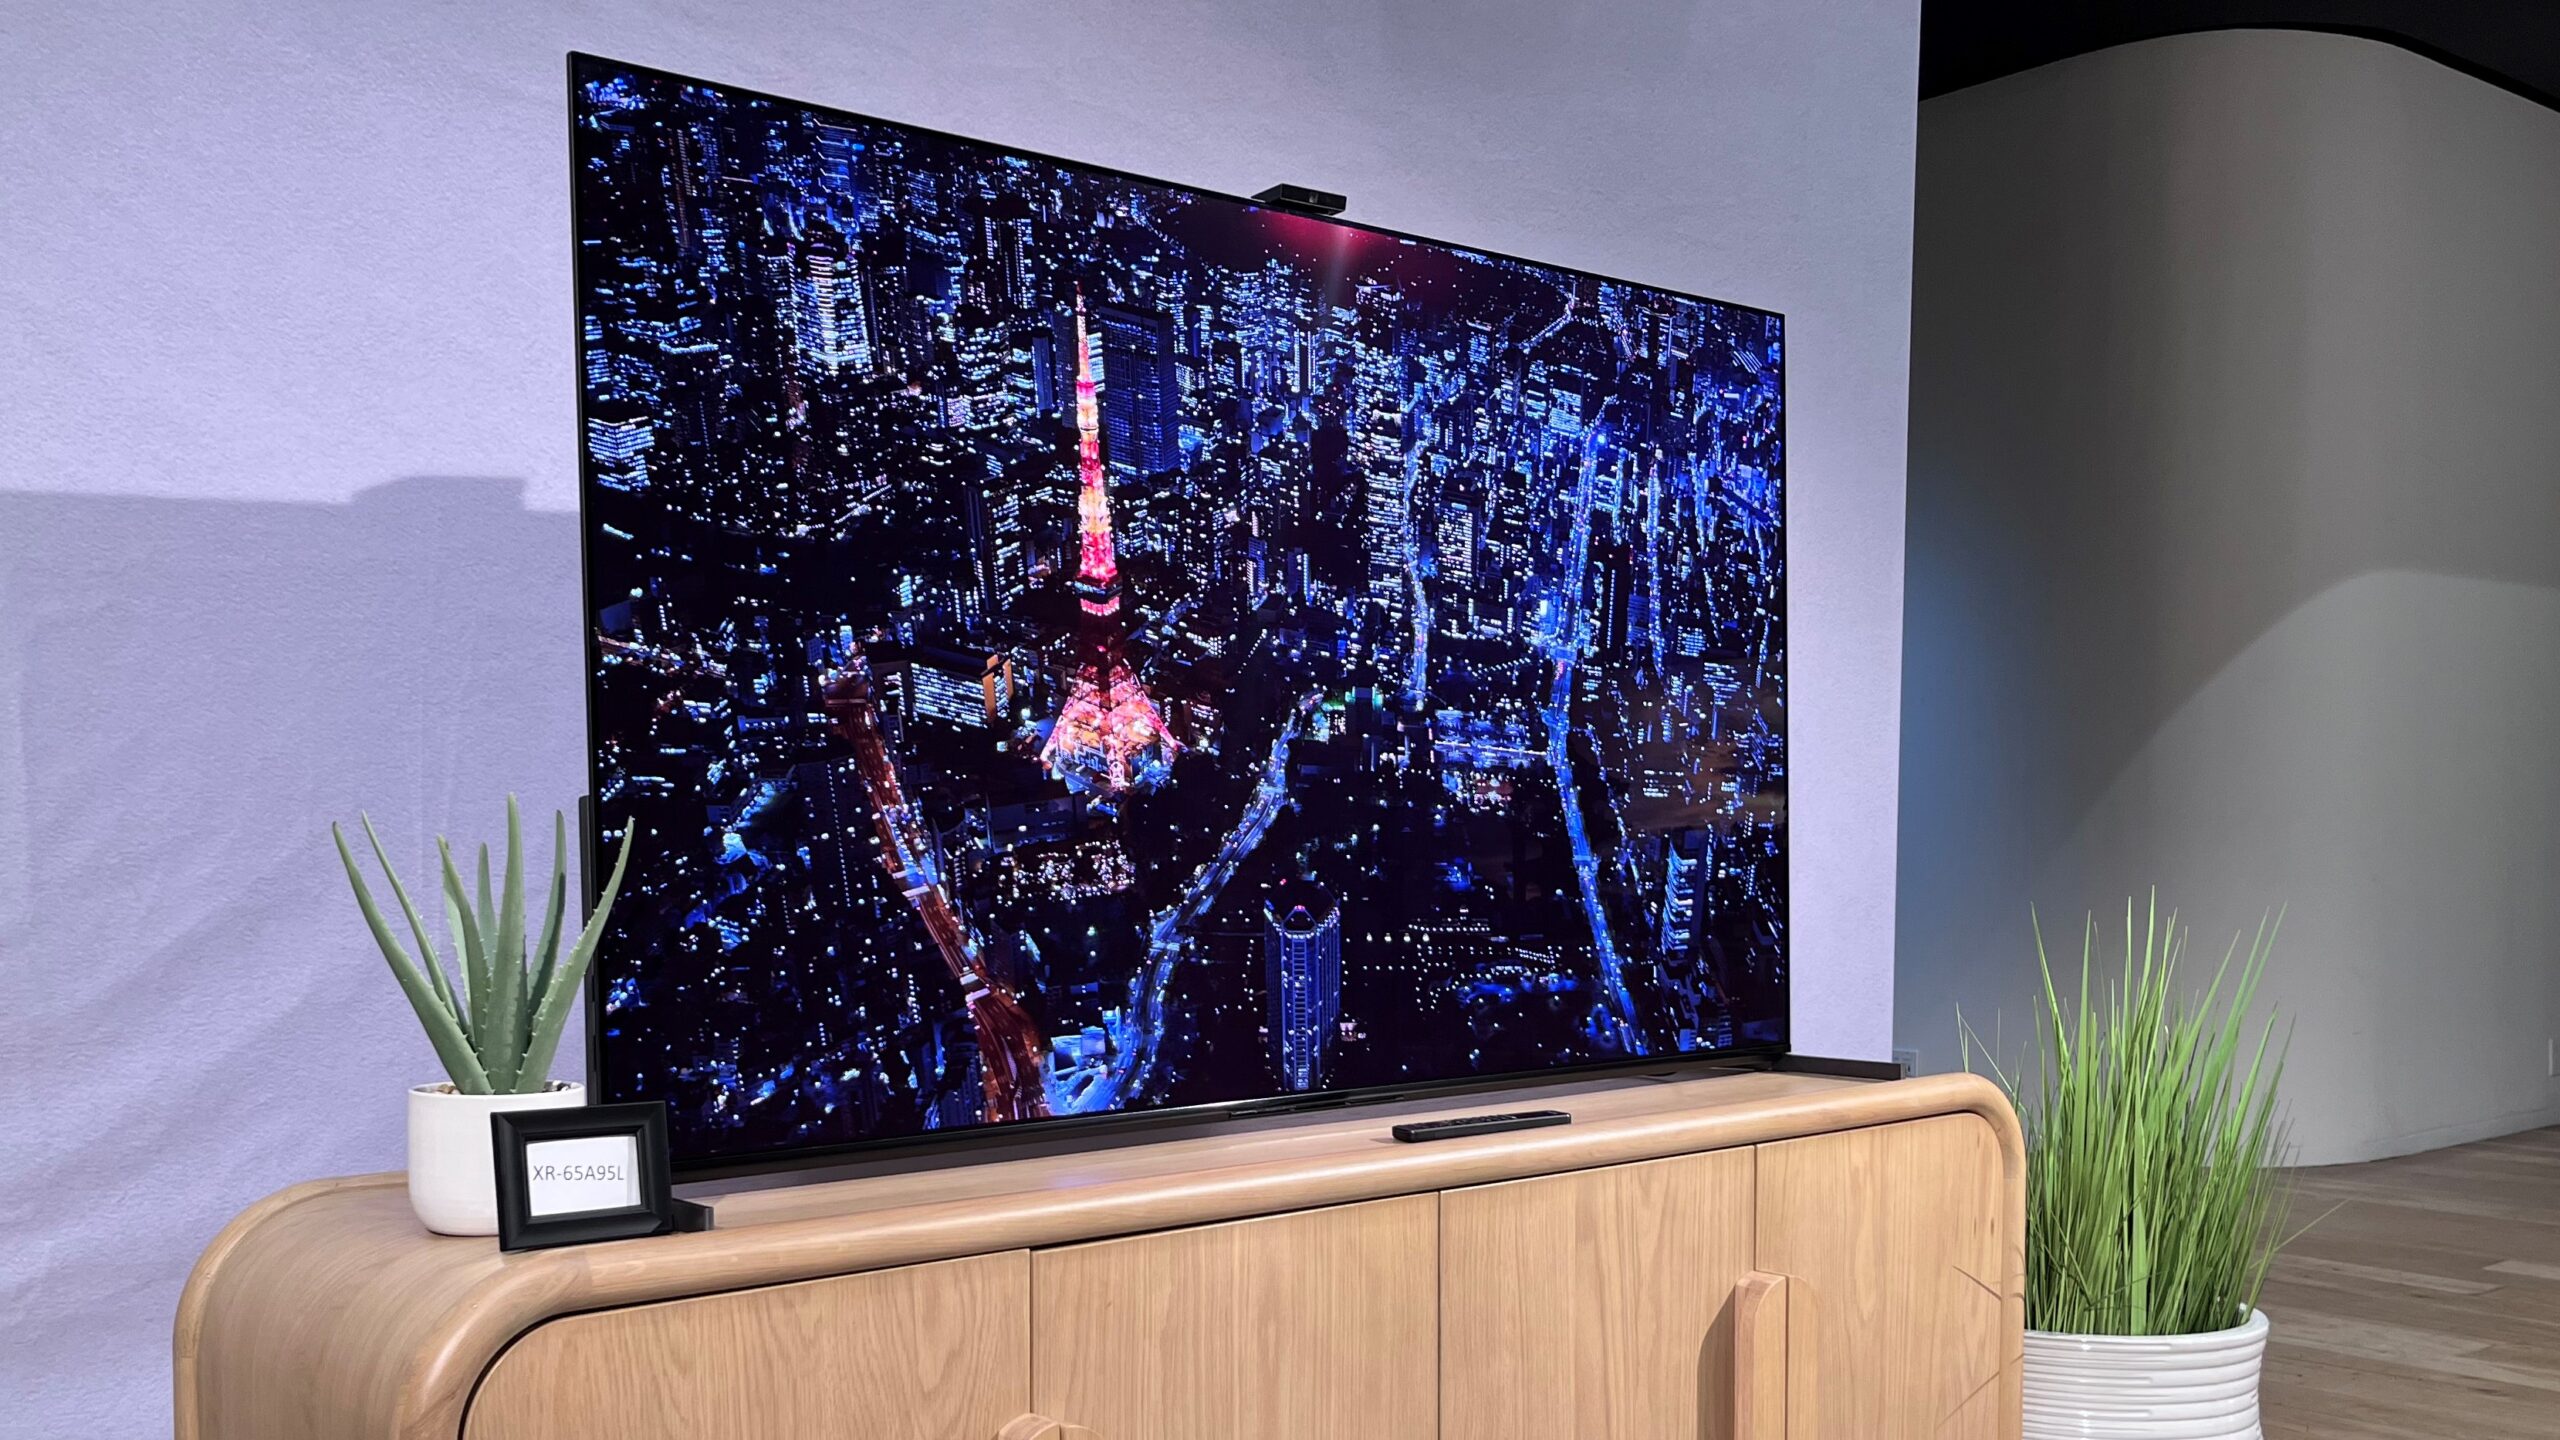 Sony A95L OLED TV: The TV that Wows Your Eyes